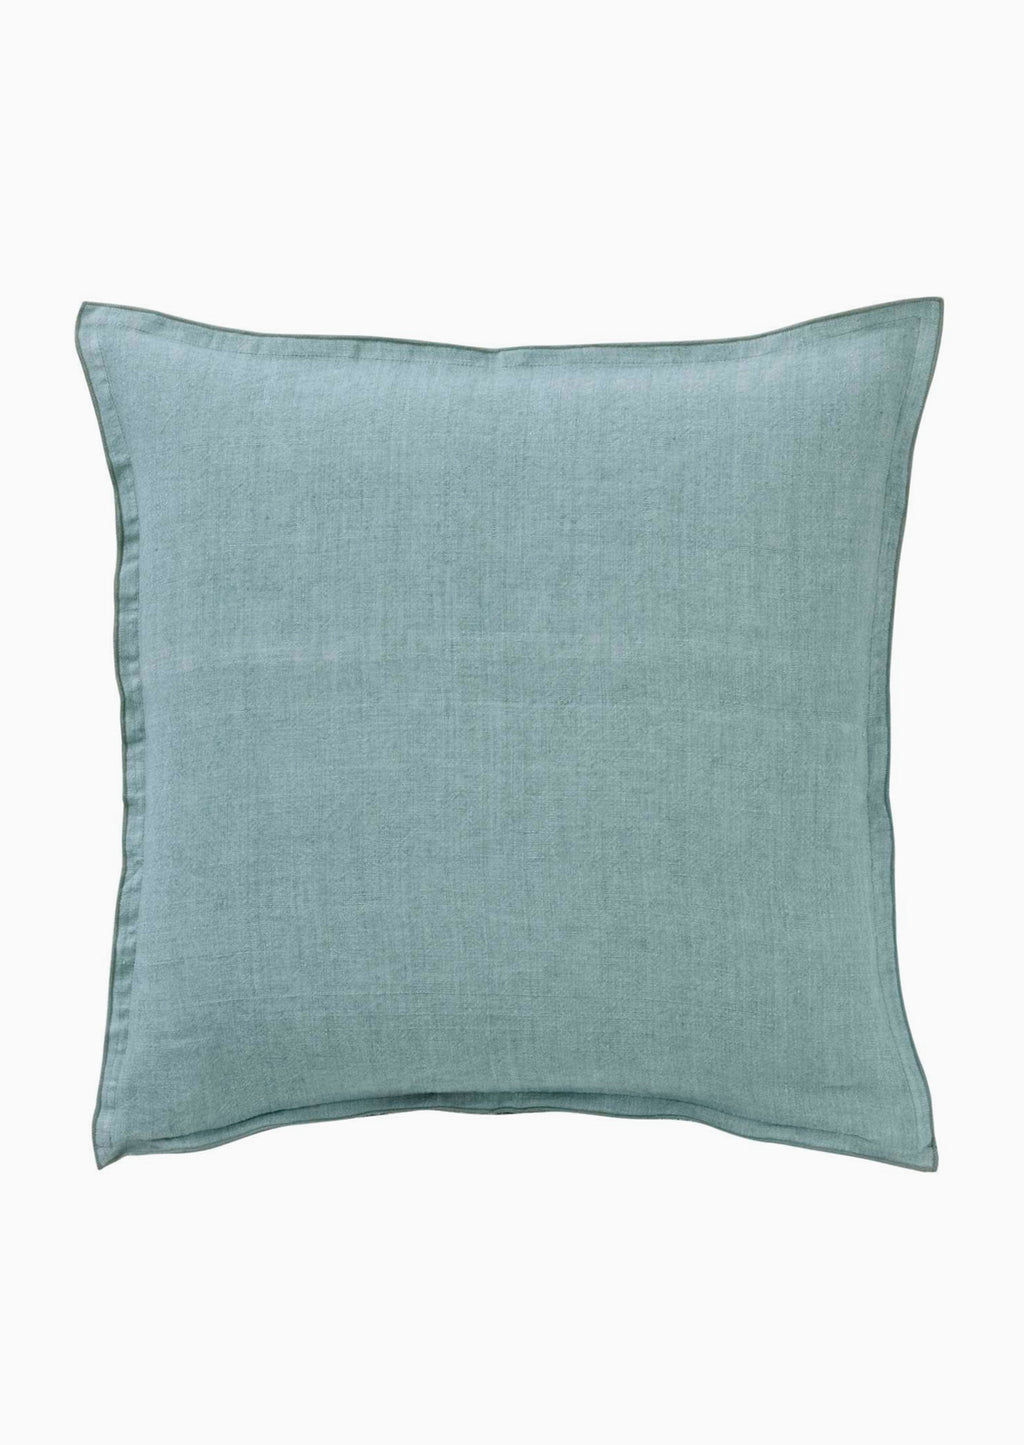 Lake Blue: A solid linen pillow in lake blue.